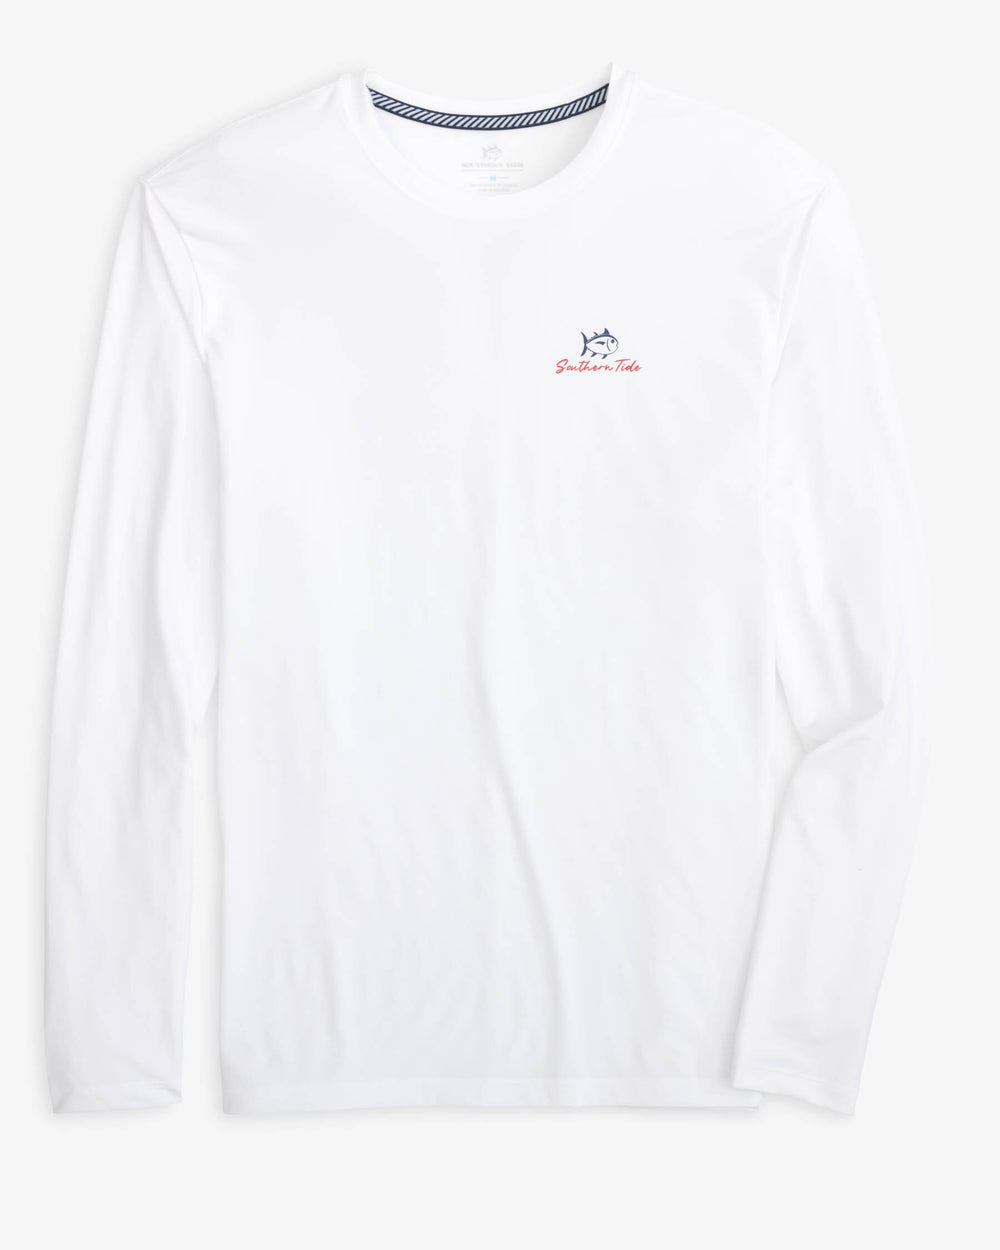 The front view of the Southern Tide Red White and Lure Long Sleeve Performance T-shirt by Southern Tide - Classic White